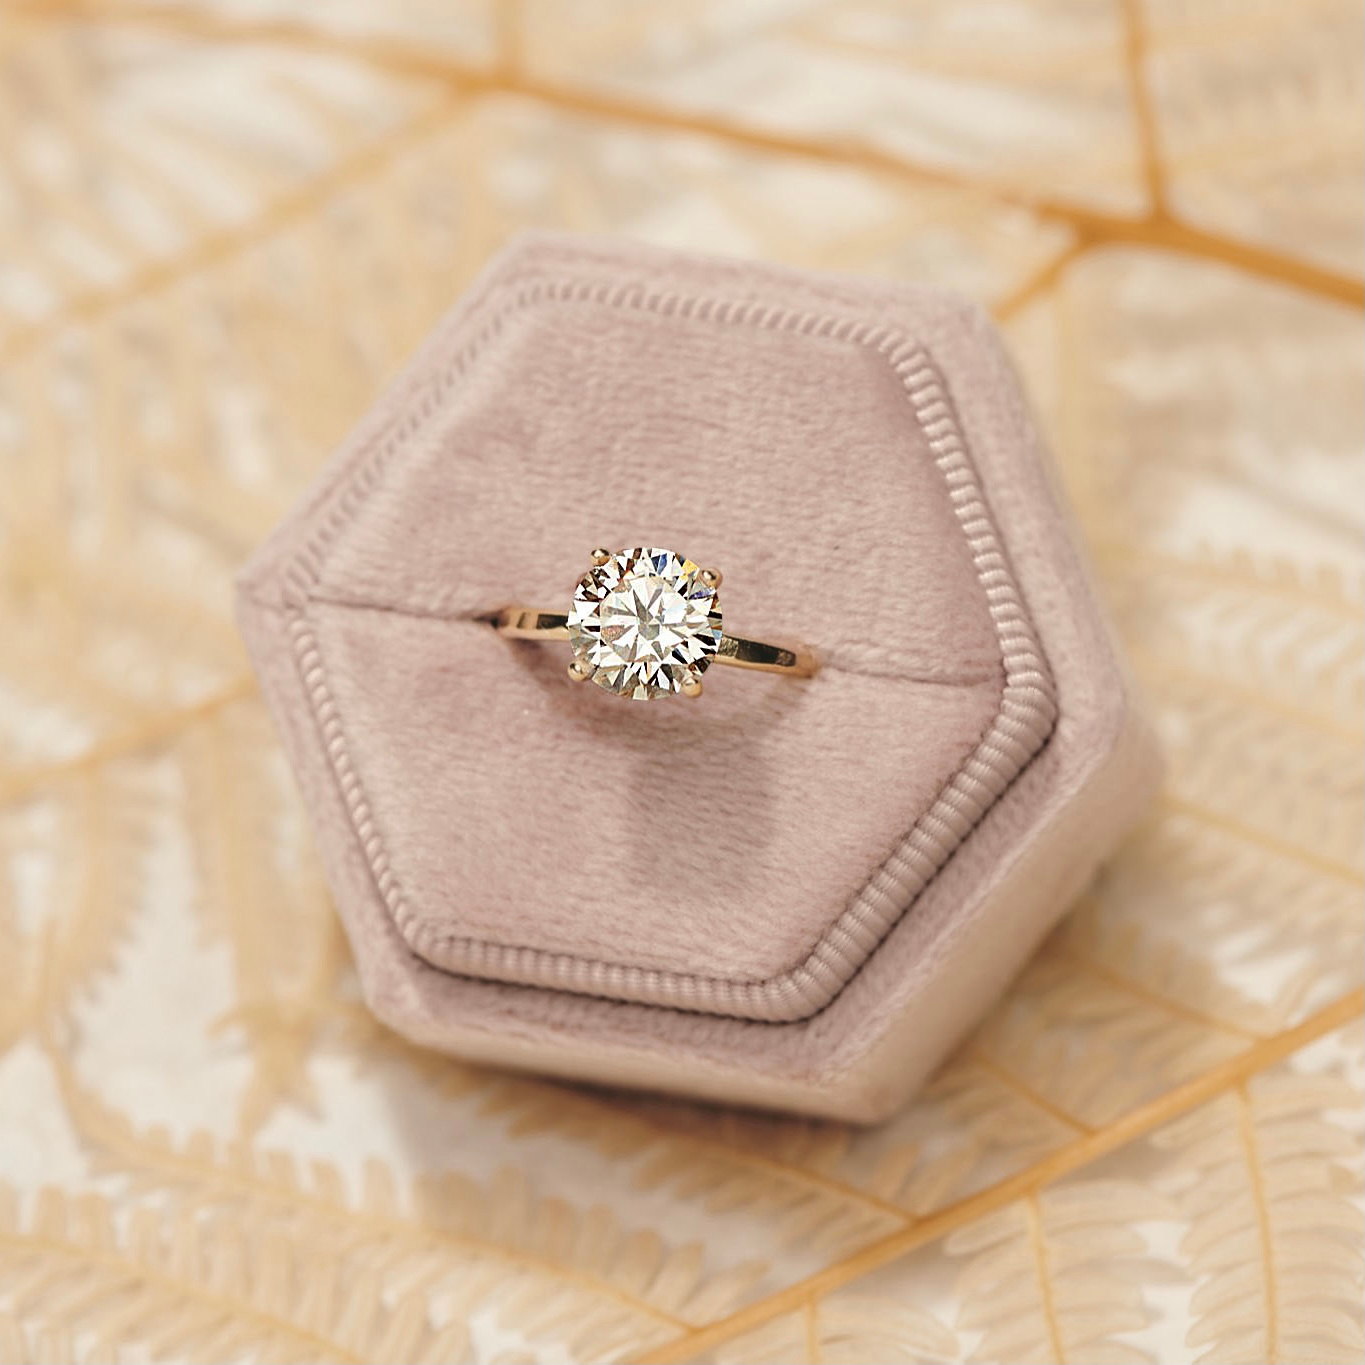 Build Your Diamond Engagement Ring